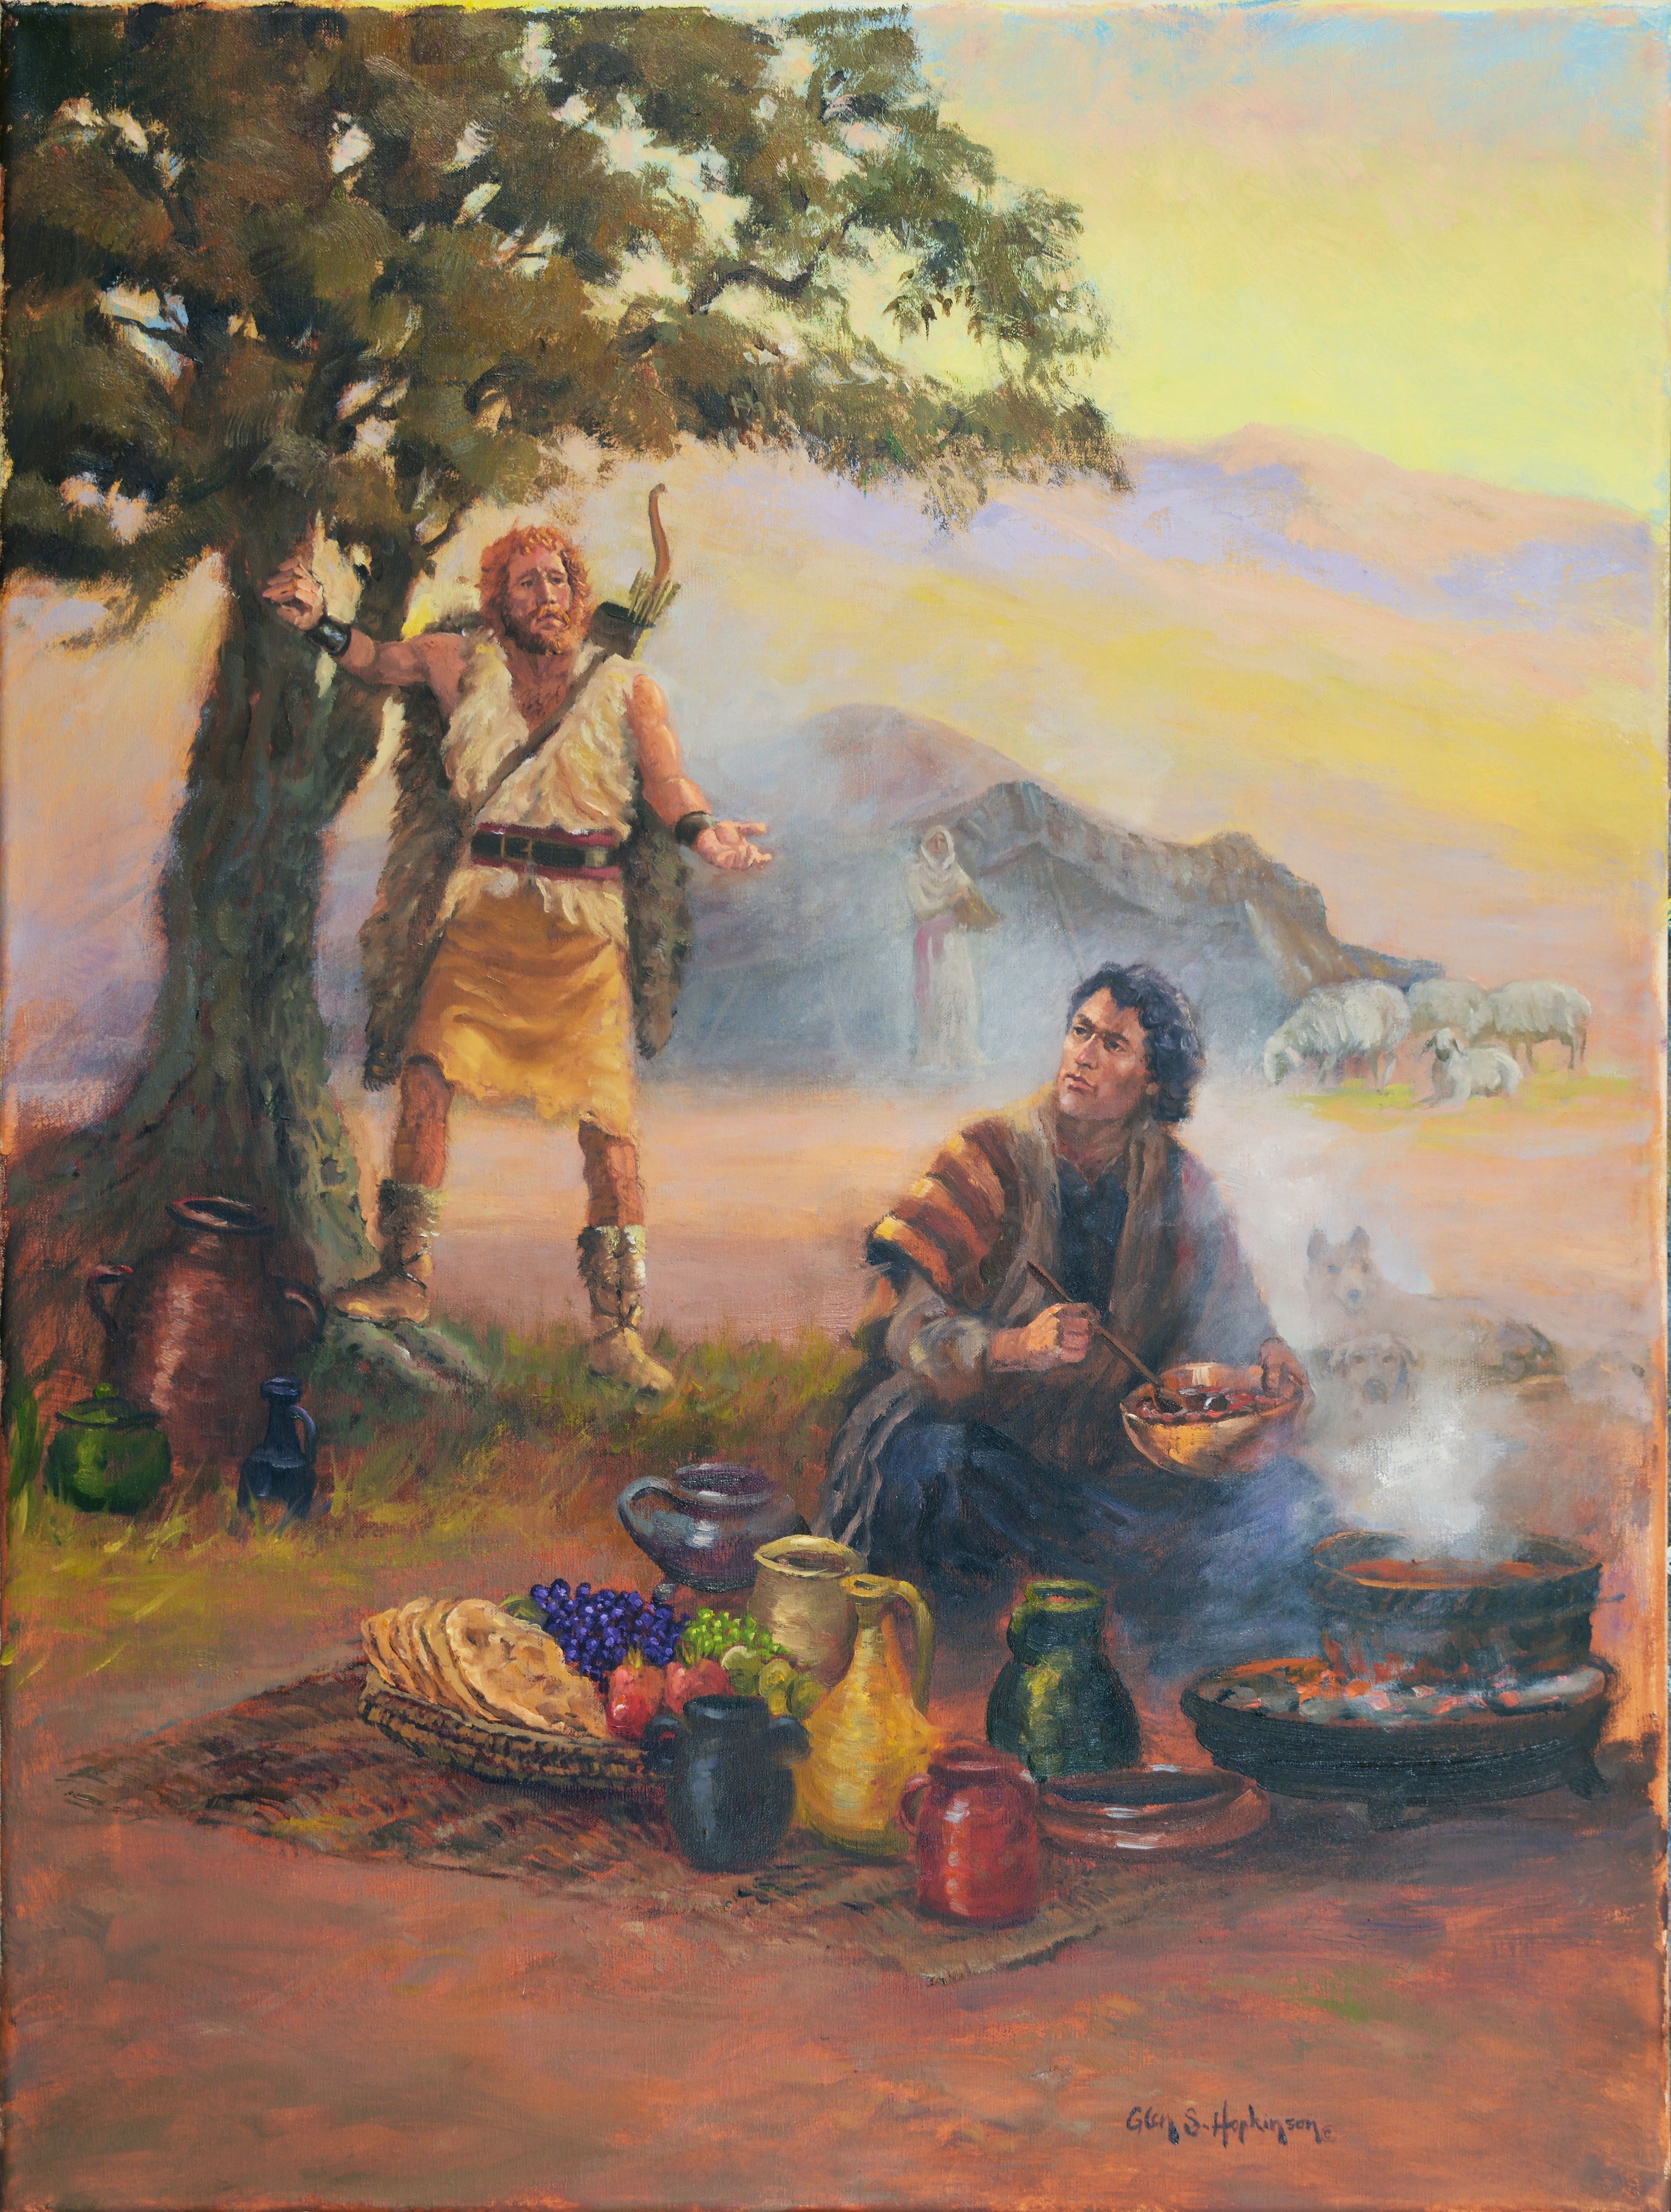 Esau sells his birthright to Jacob for a bowl of pottage.